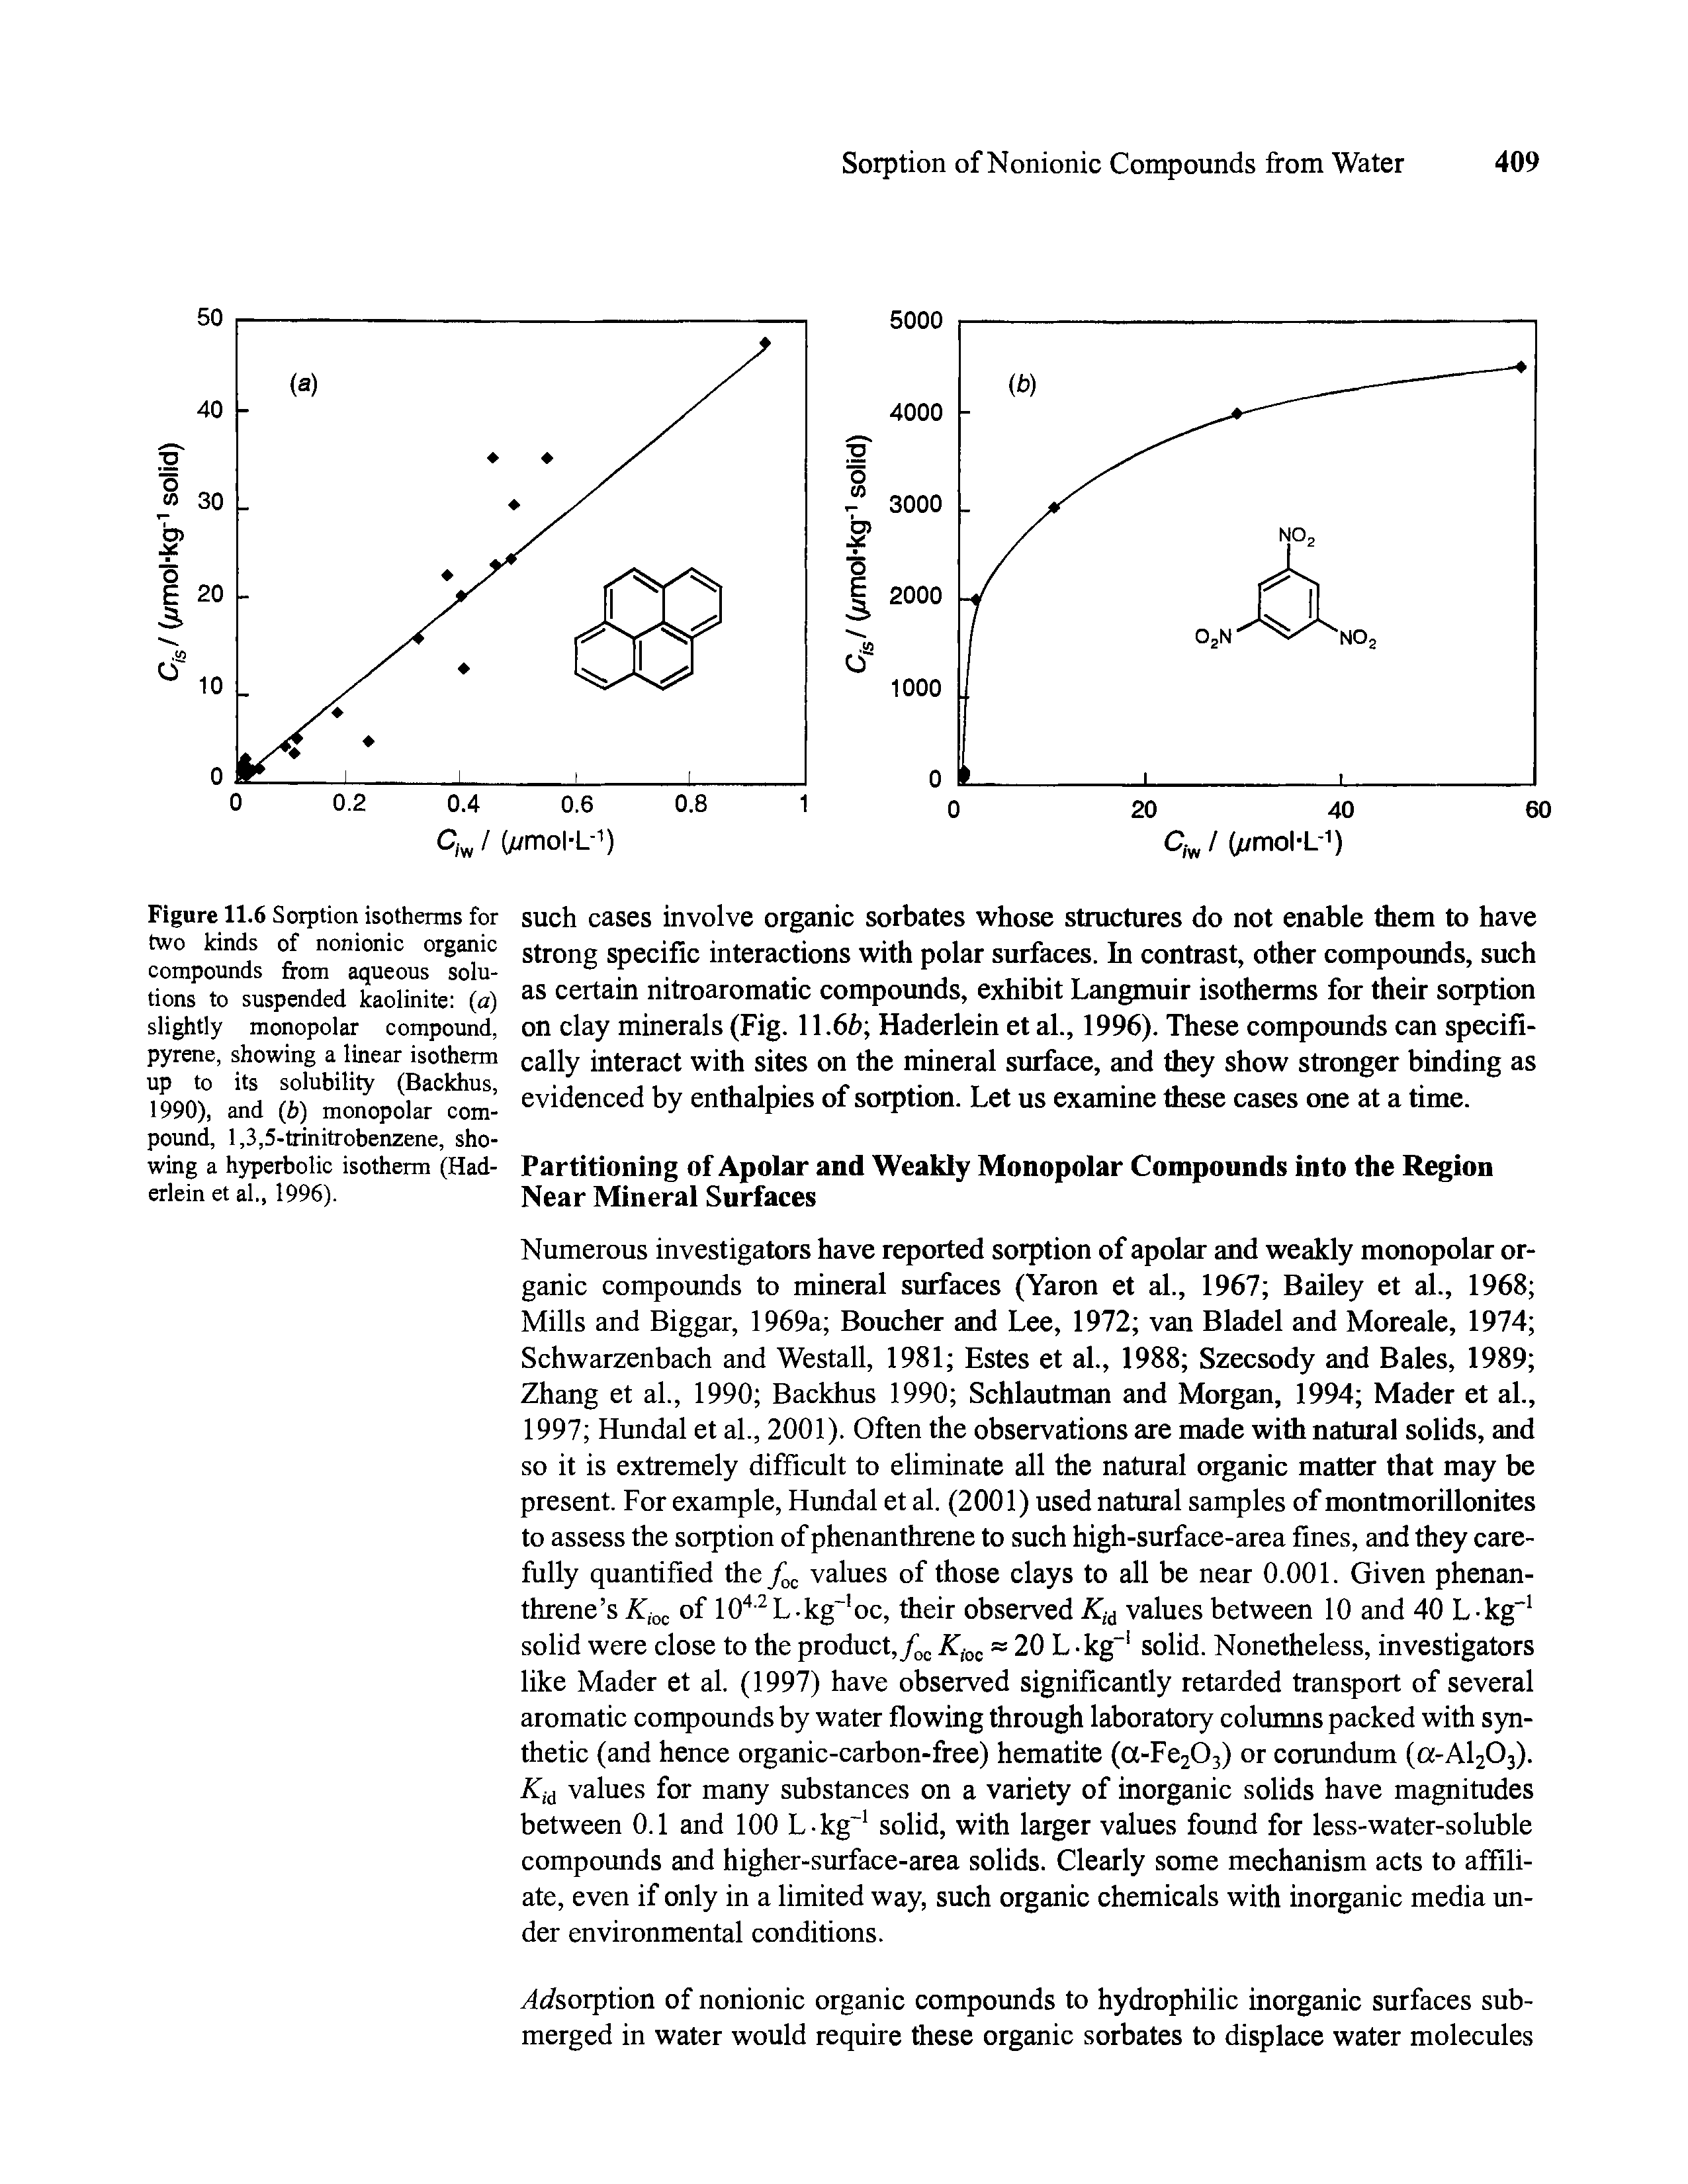 Figure 11.6 Sorption isotherms for two kinds of nonionic organic compounds from aqueous solutions to suspended kaolinite (a) slightly monopolar compound, pyrene, showing a linear isotherm up to its solubility (Backhus, 1990), and (b) monopolar compound, 1,3,5-trinitrobenzene, showing a hyperbolic isotherm (Had-erlein et al., 1996).